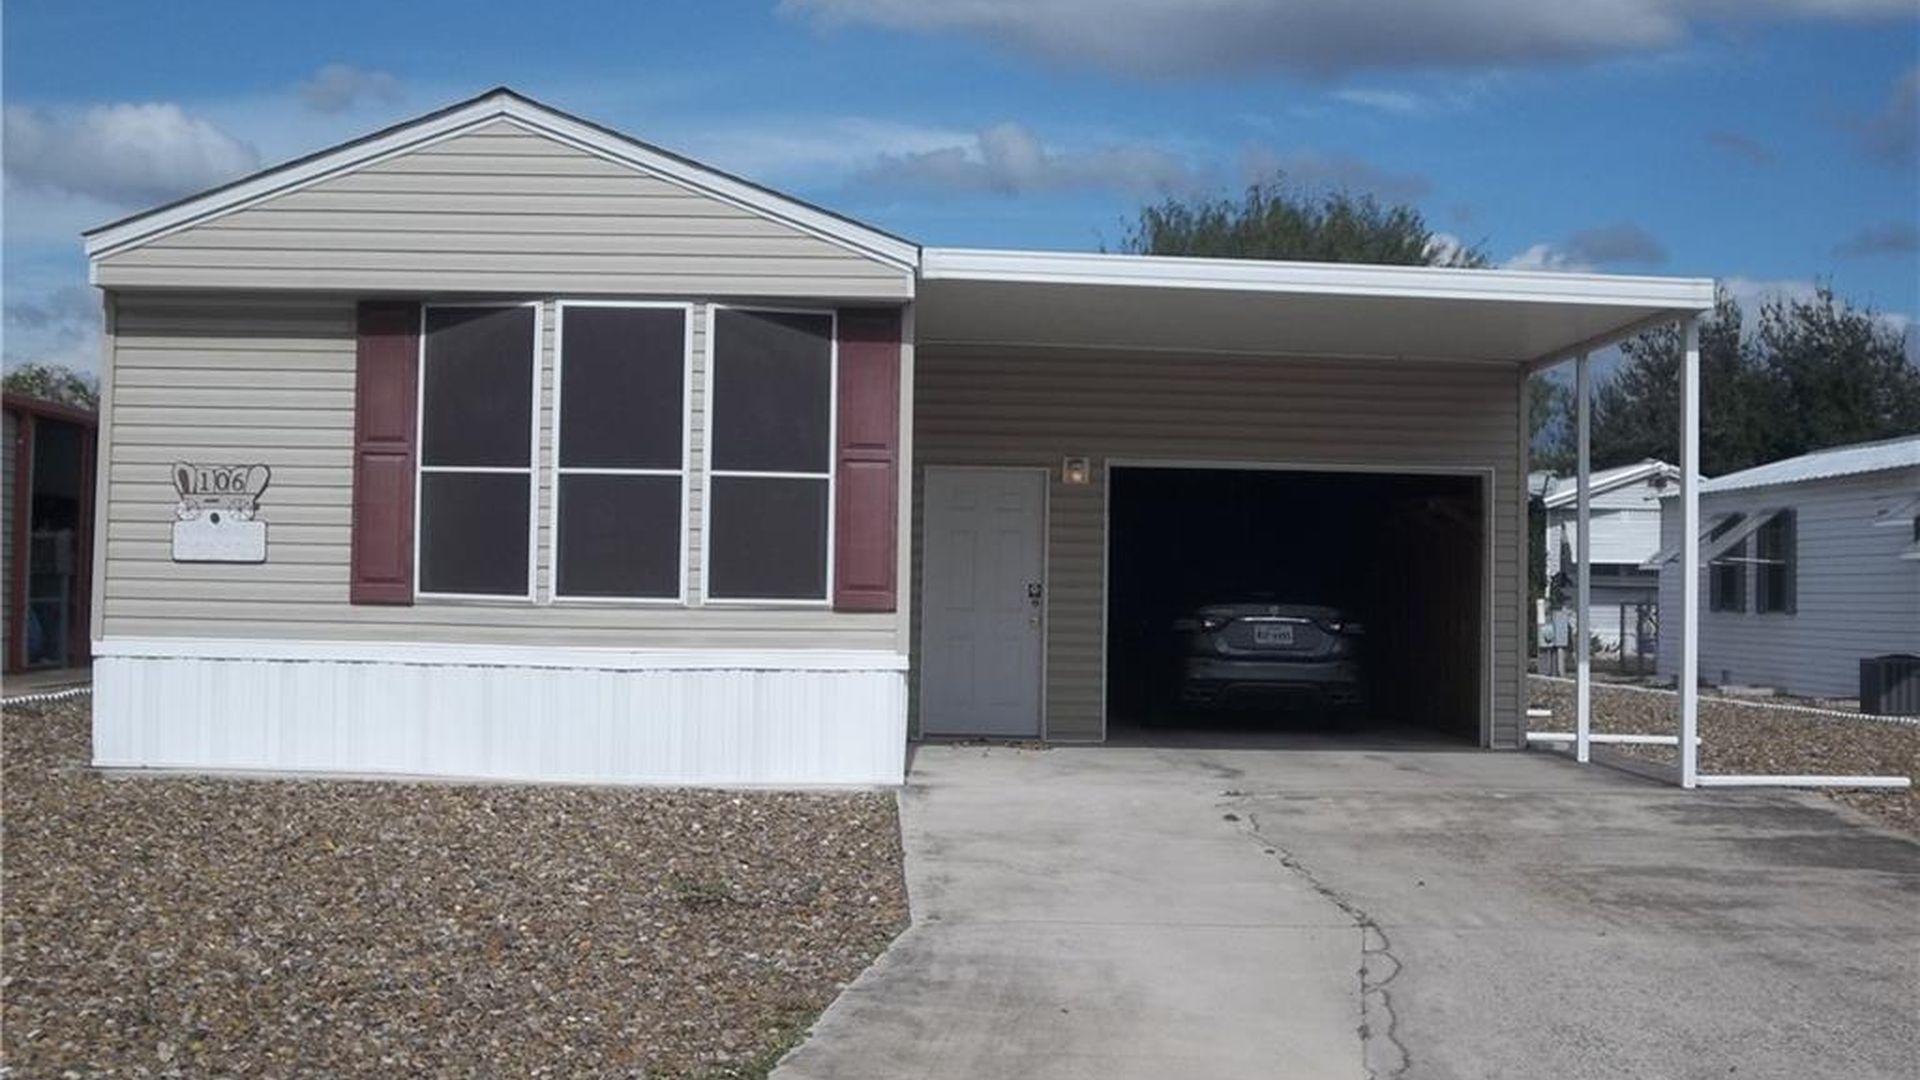 Used Mobile Homes Mcallen Tx - Homemade Ftempo